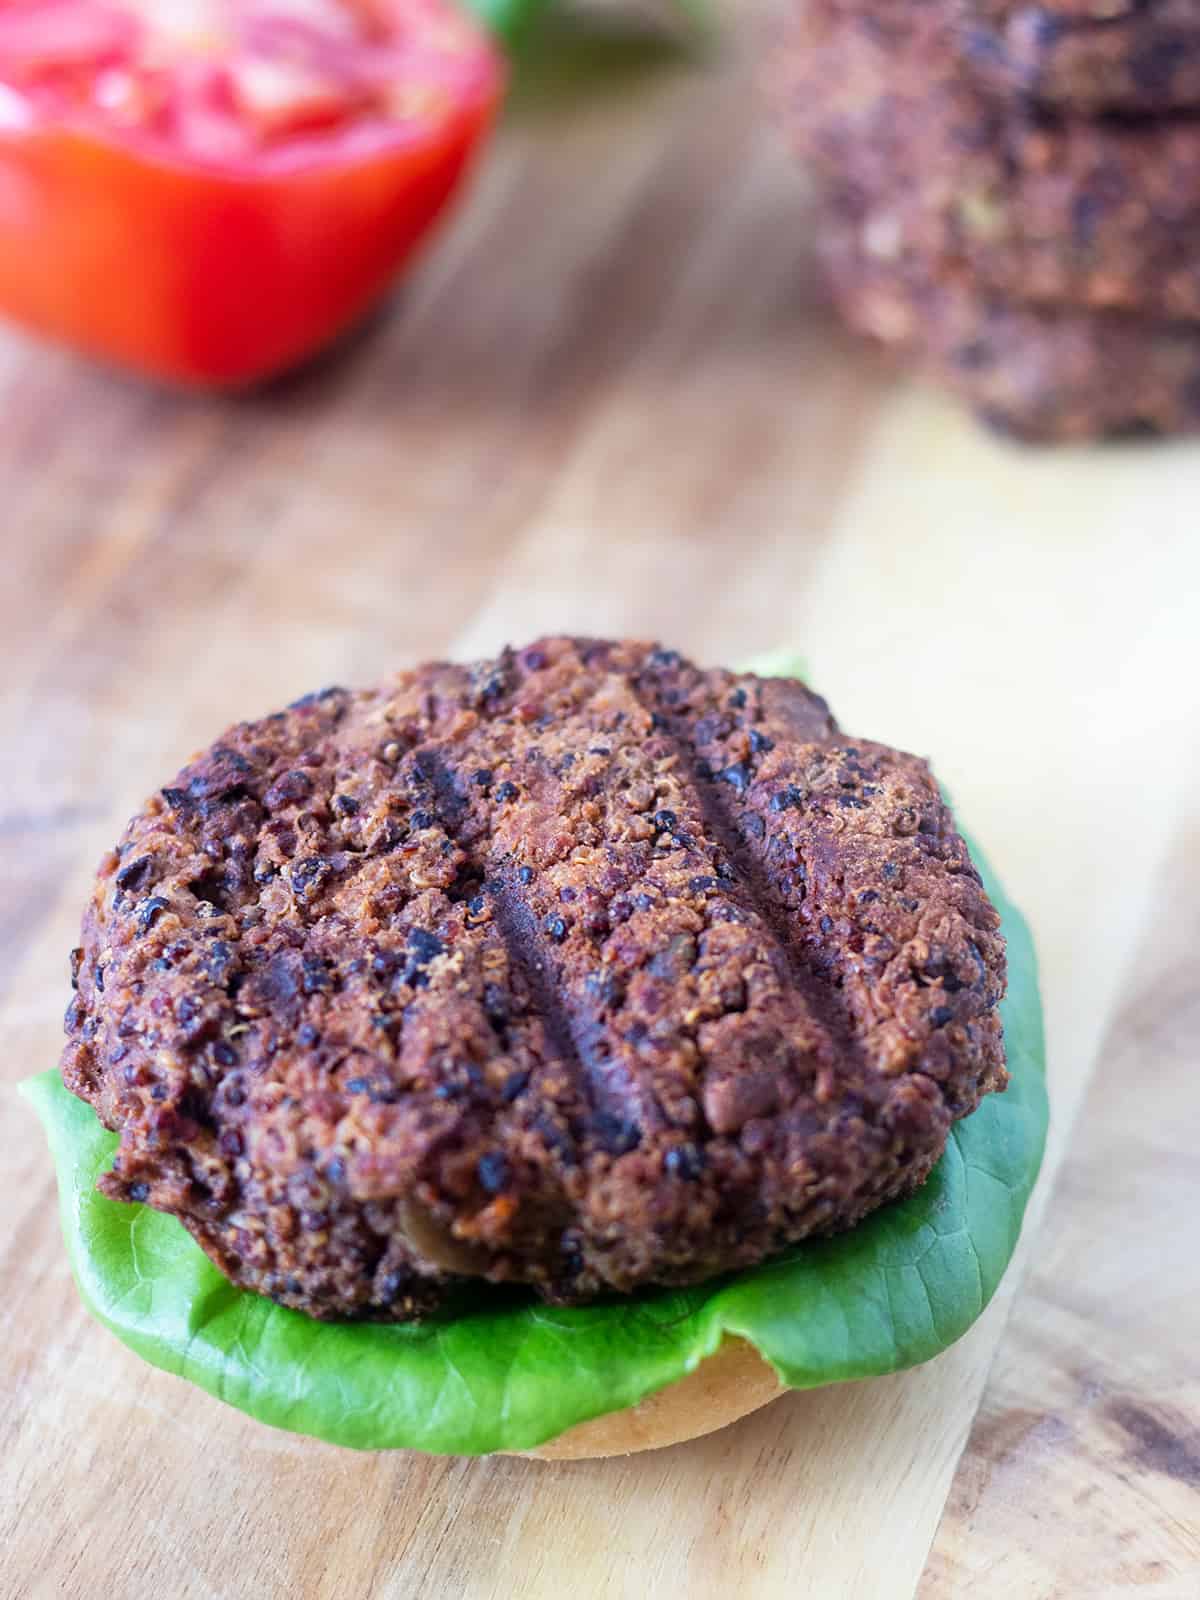 Grilled Black Bean Quinoa Burger topped on a bun with lettuce